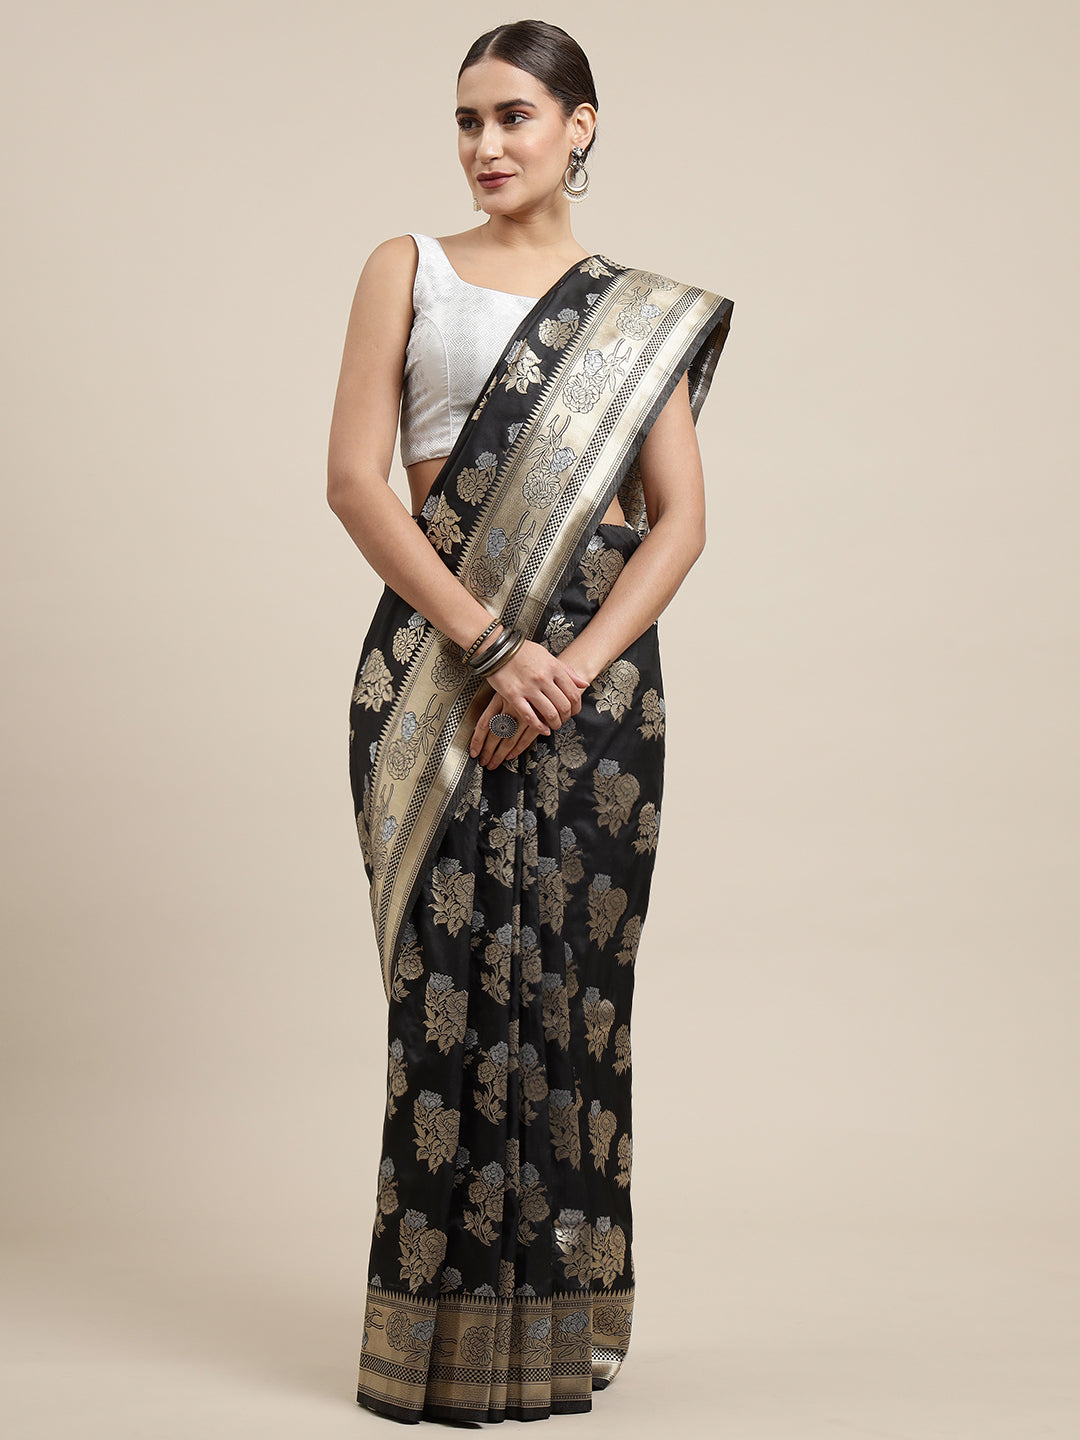 Black Color Latest Bollywood Collection Banarasi Silk Saree Silver And Gold Toned Zari Weaving Work With Blouse